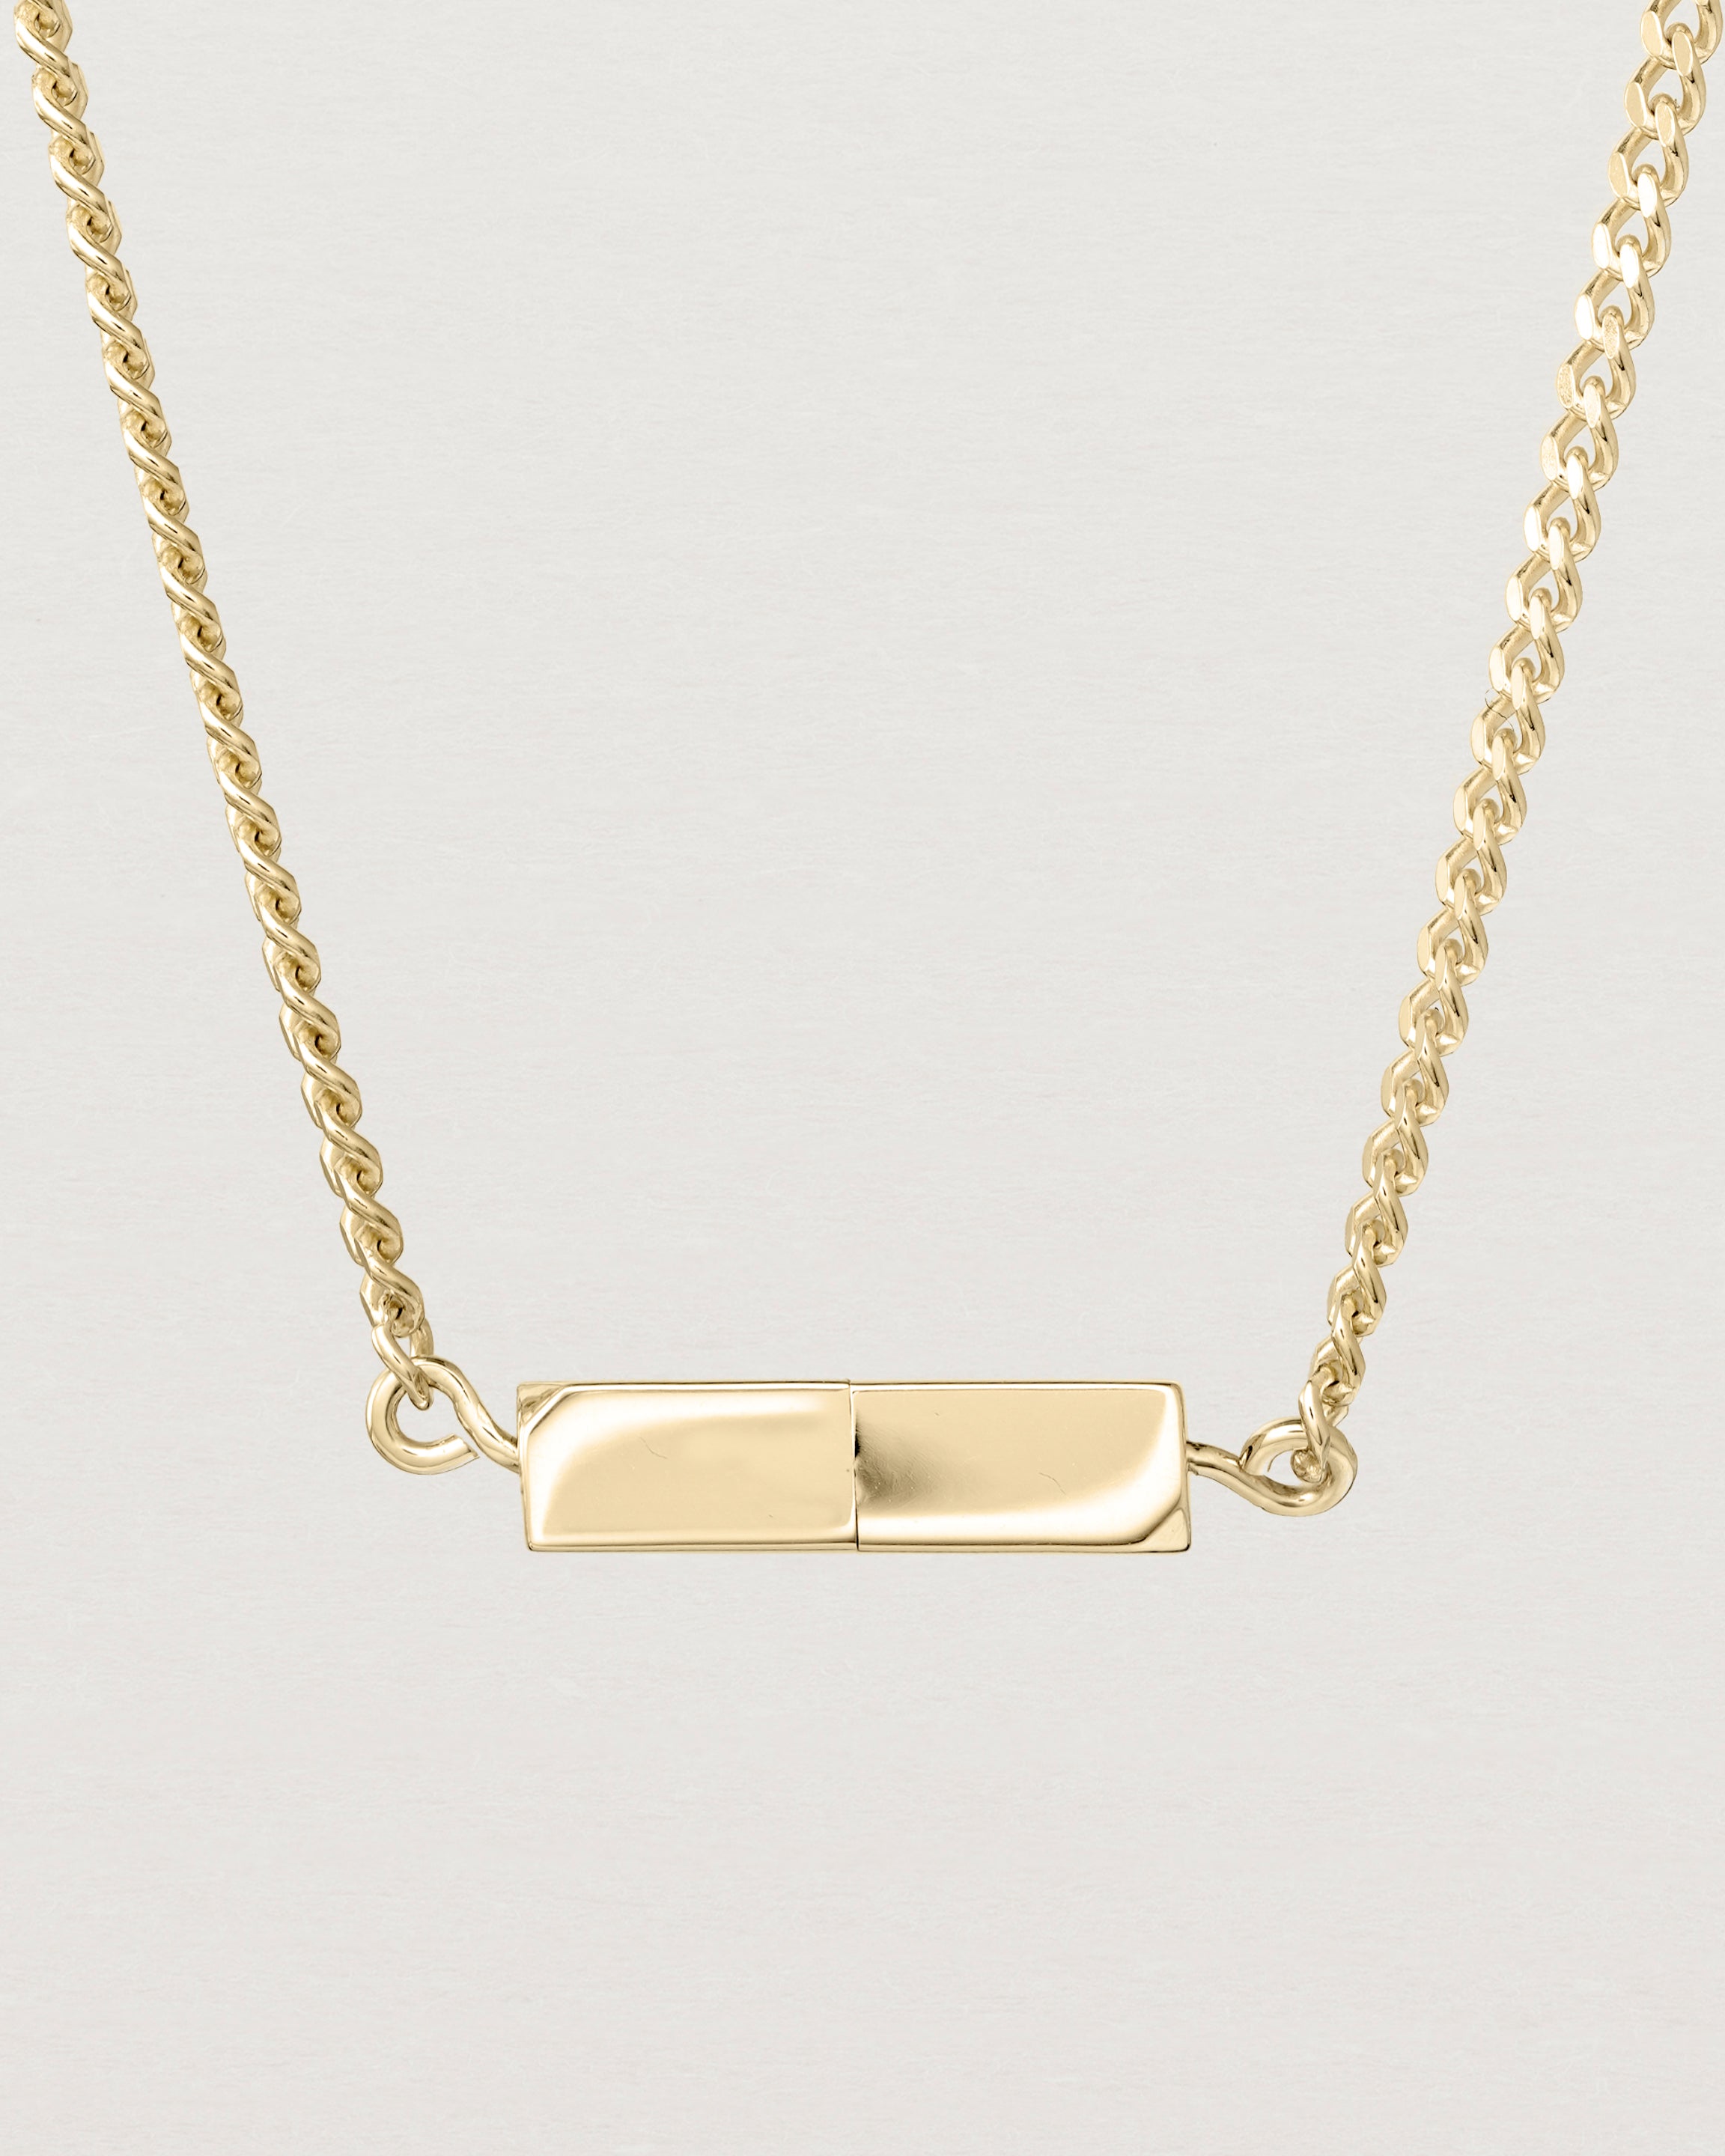 Close up view of the Guardian Chain in yellow gold.